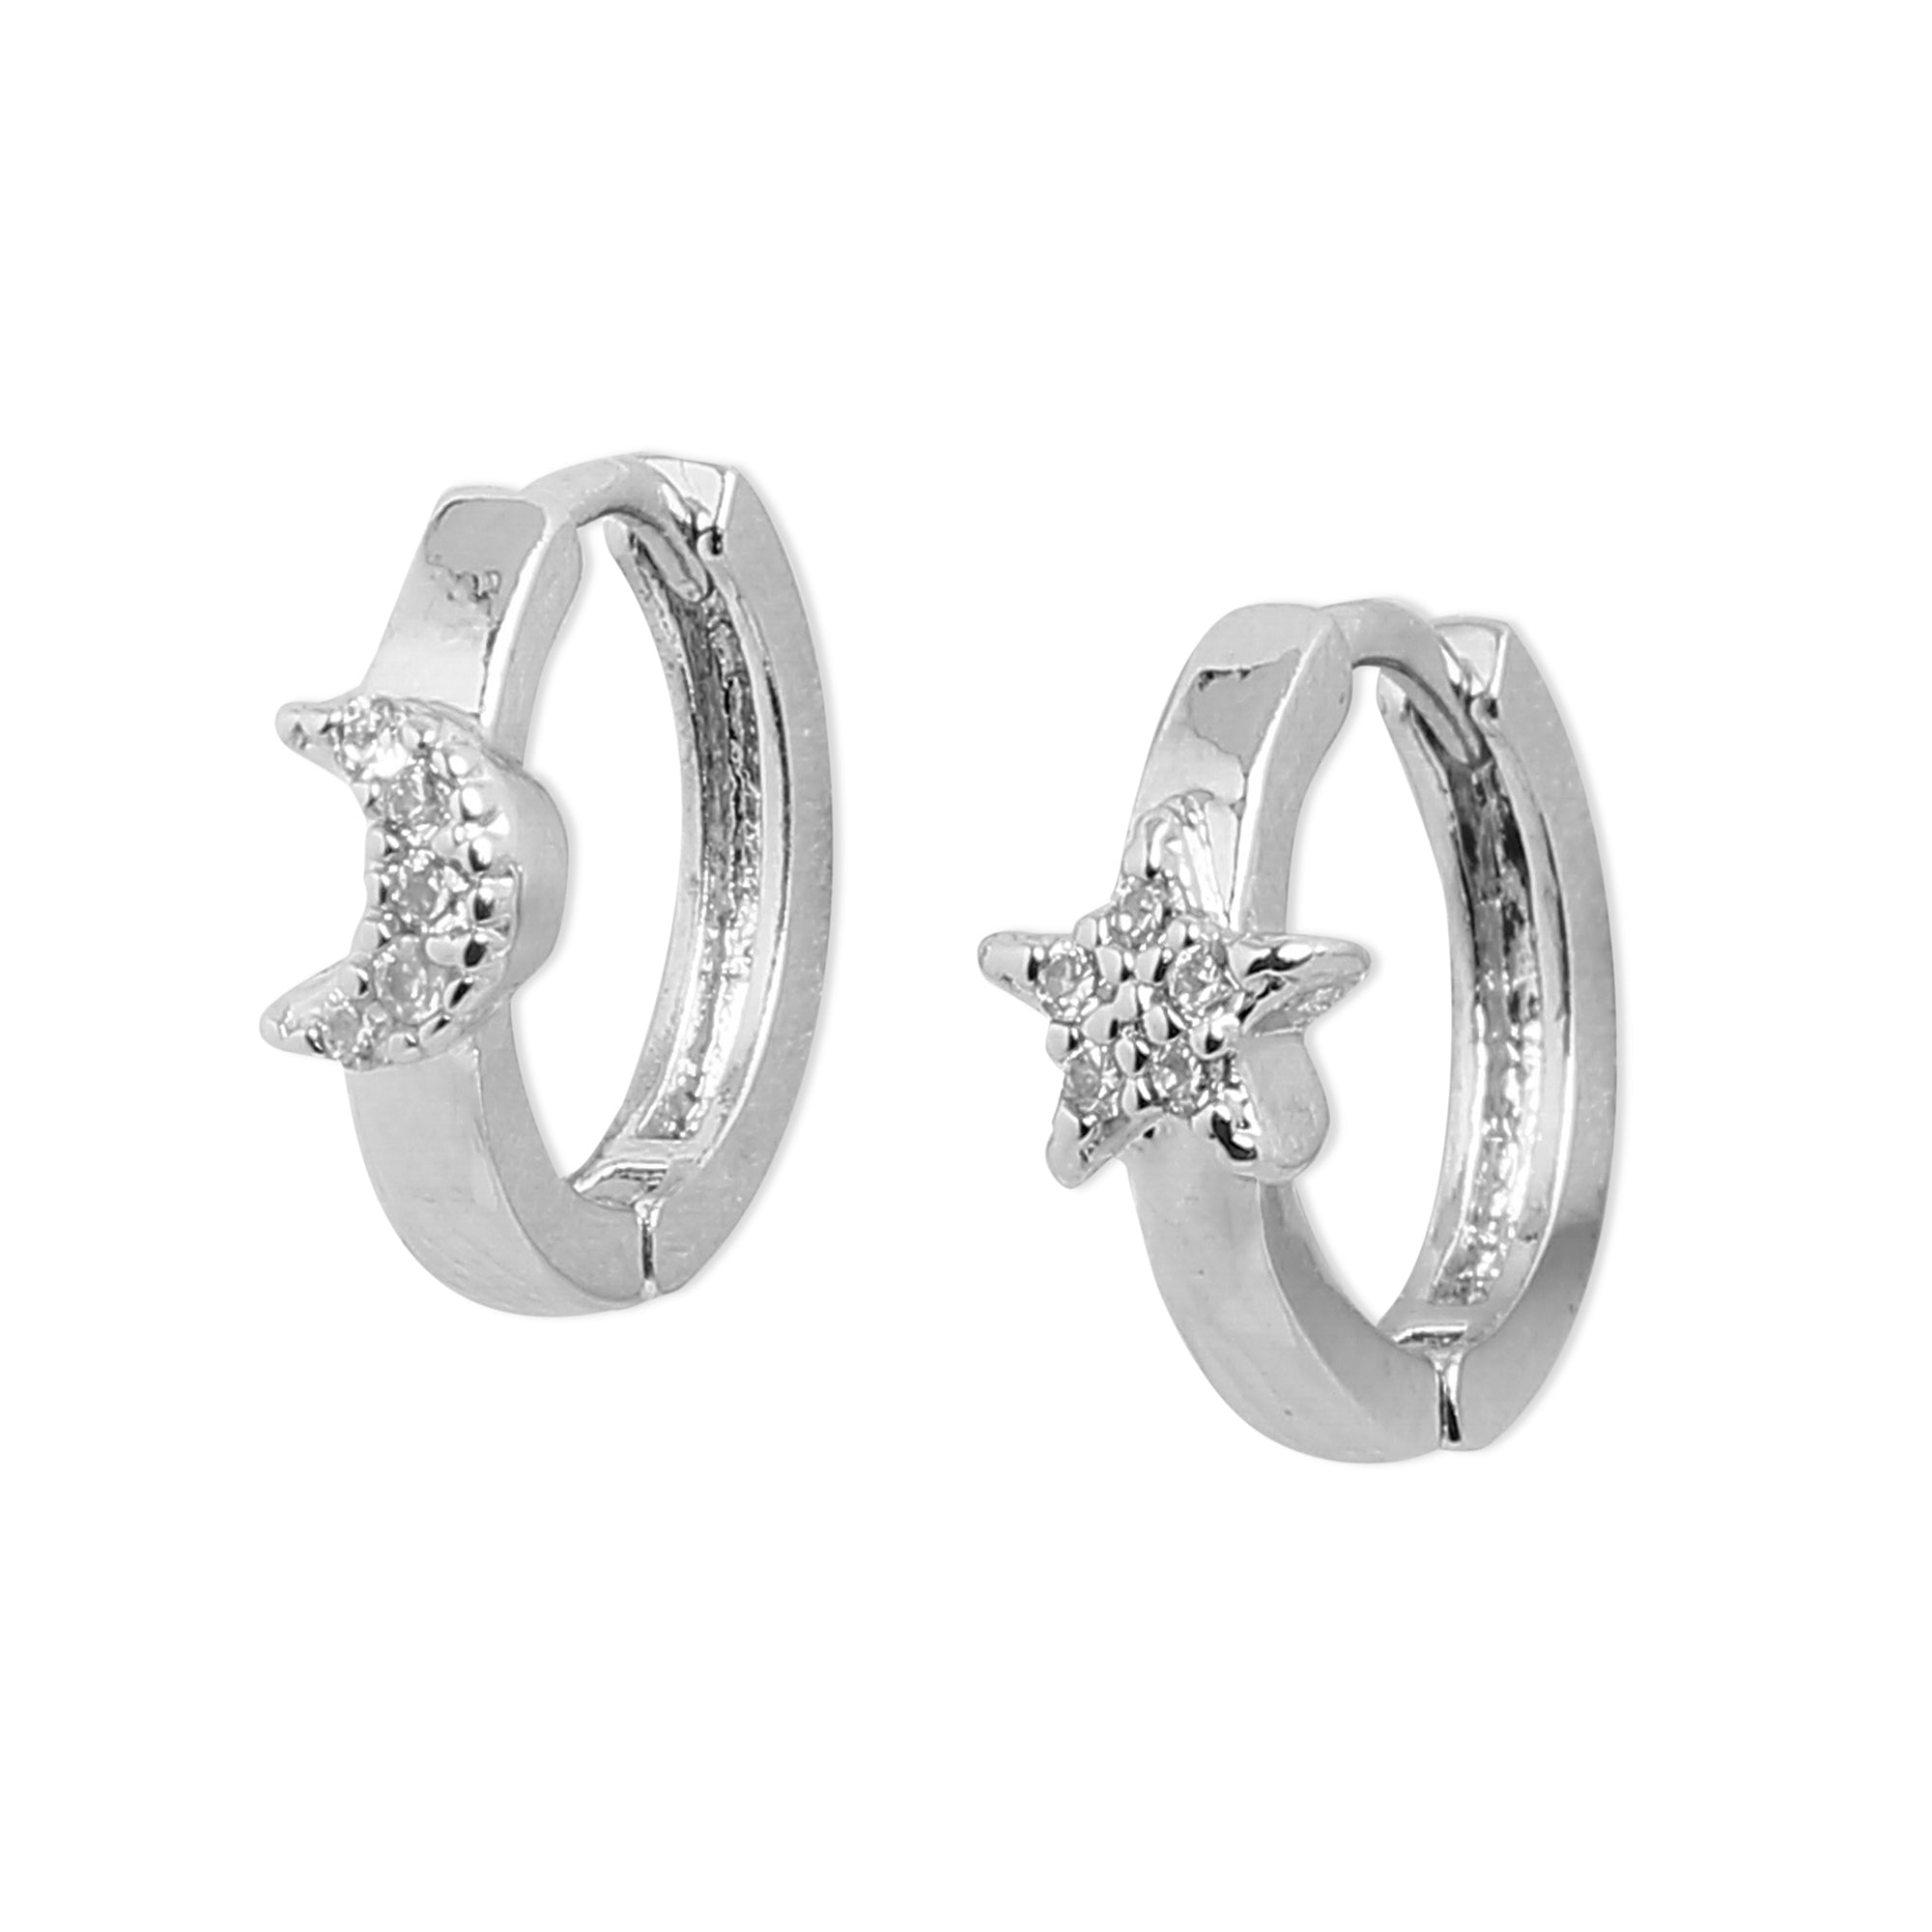 Platinum Plated 3 Pack Celestial Stud And Hoop Earring For Women By Accessorize London